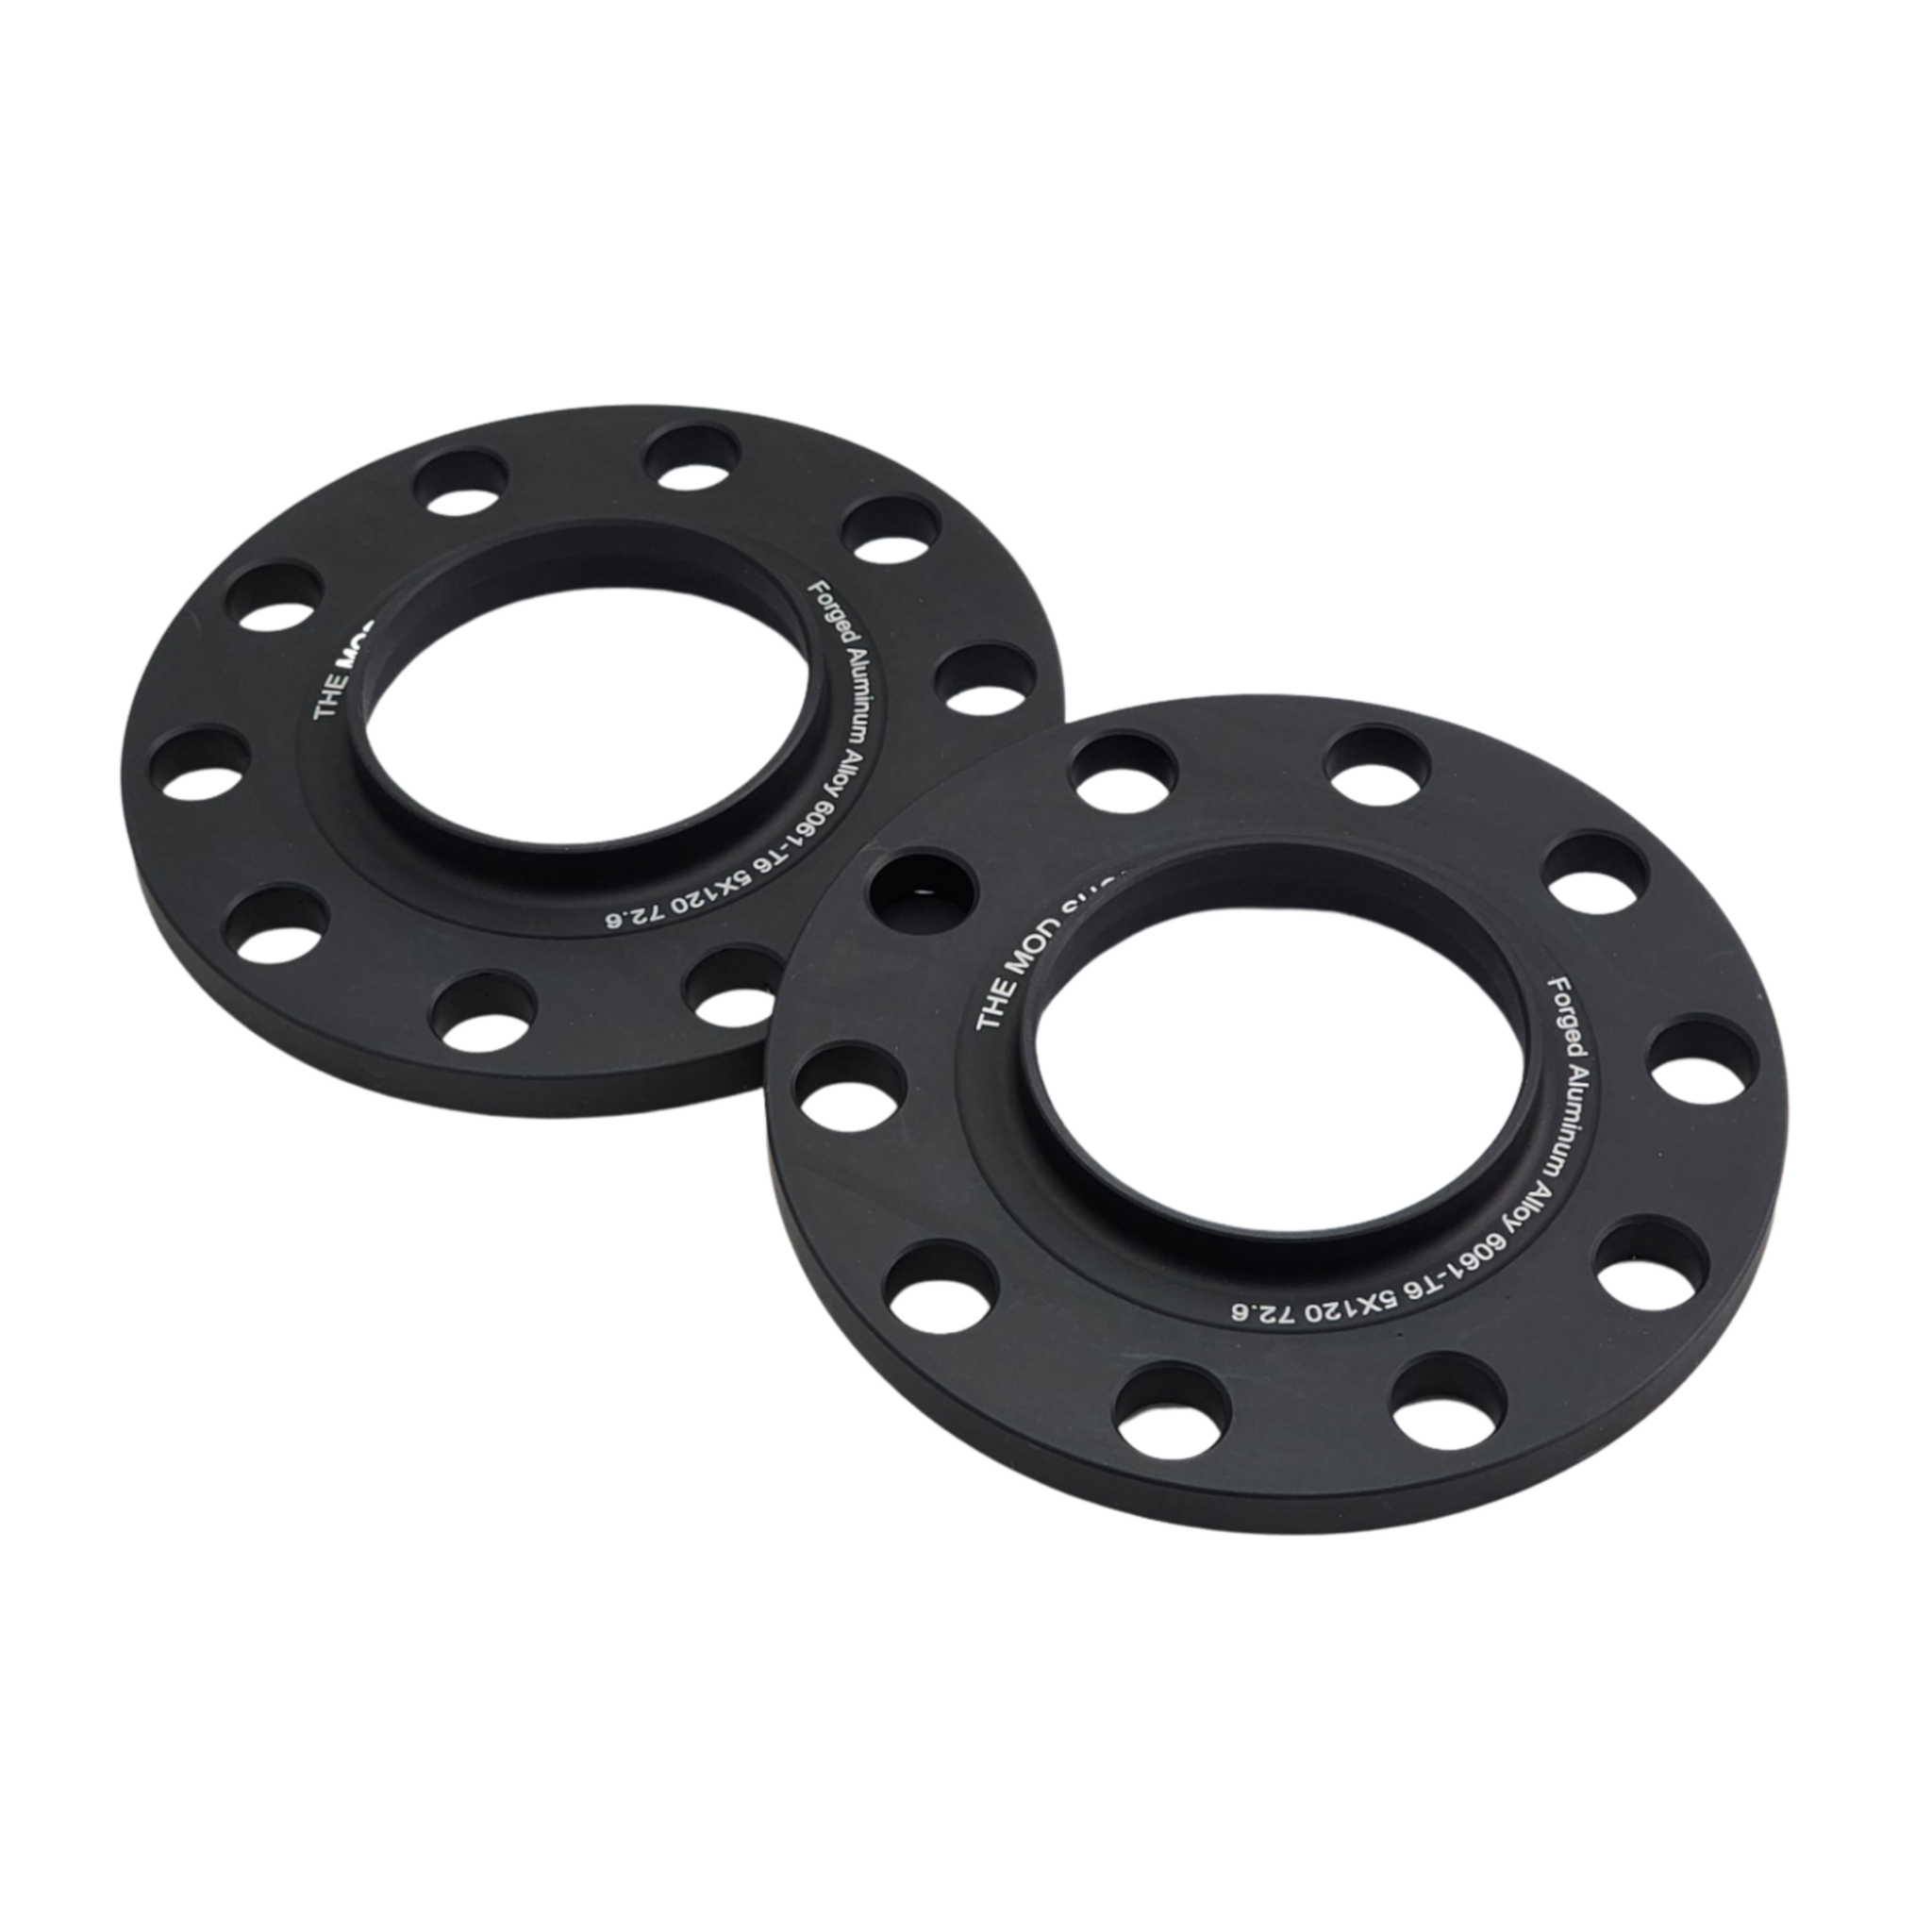 12mm BMW Alloy Wheel Spacers Kit 5x120 72.6 – The Mod Shop